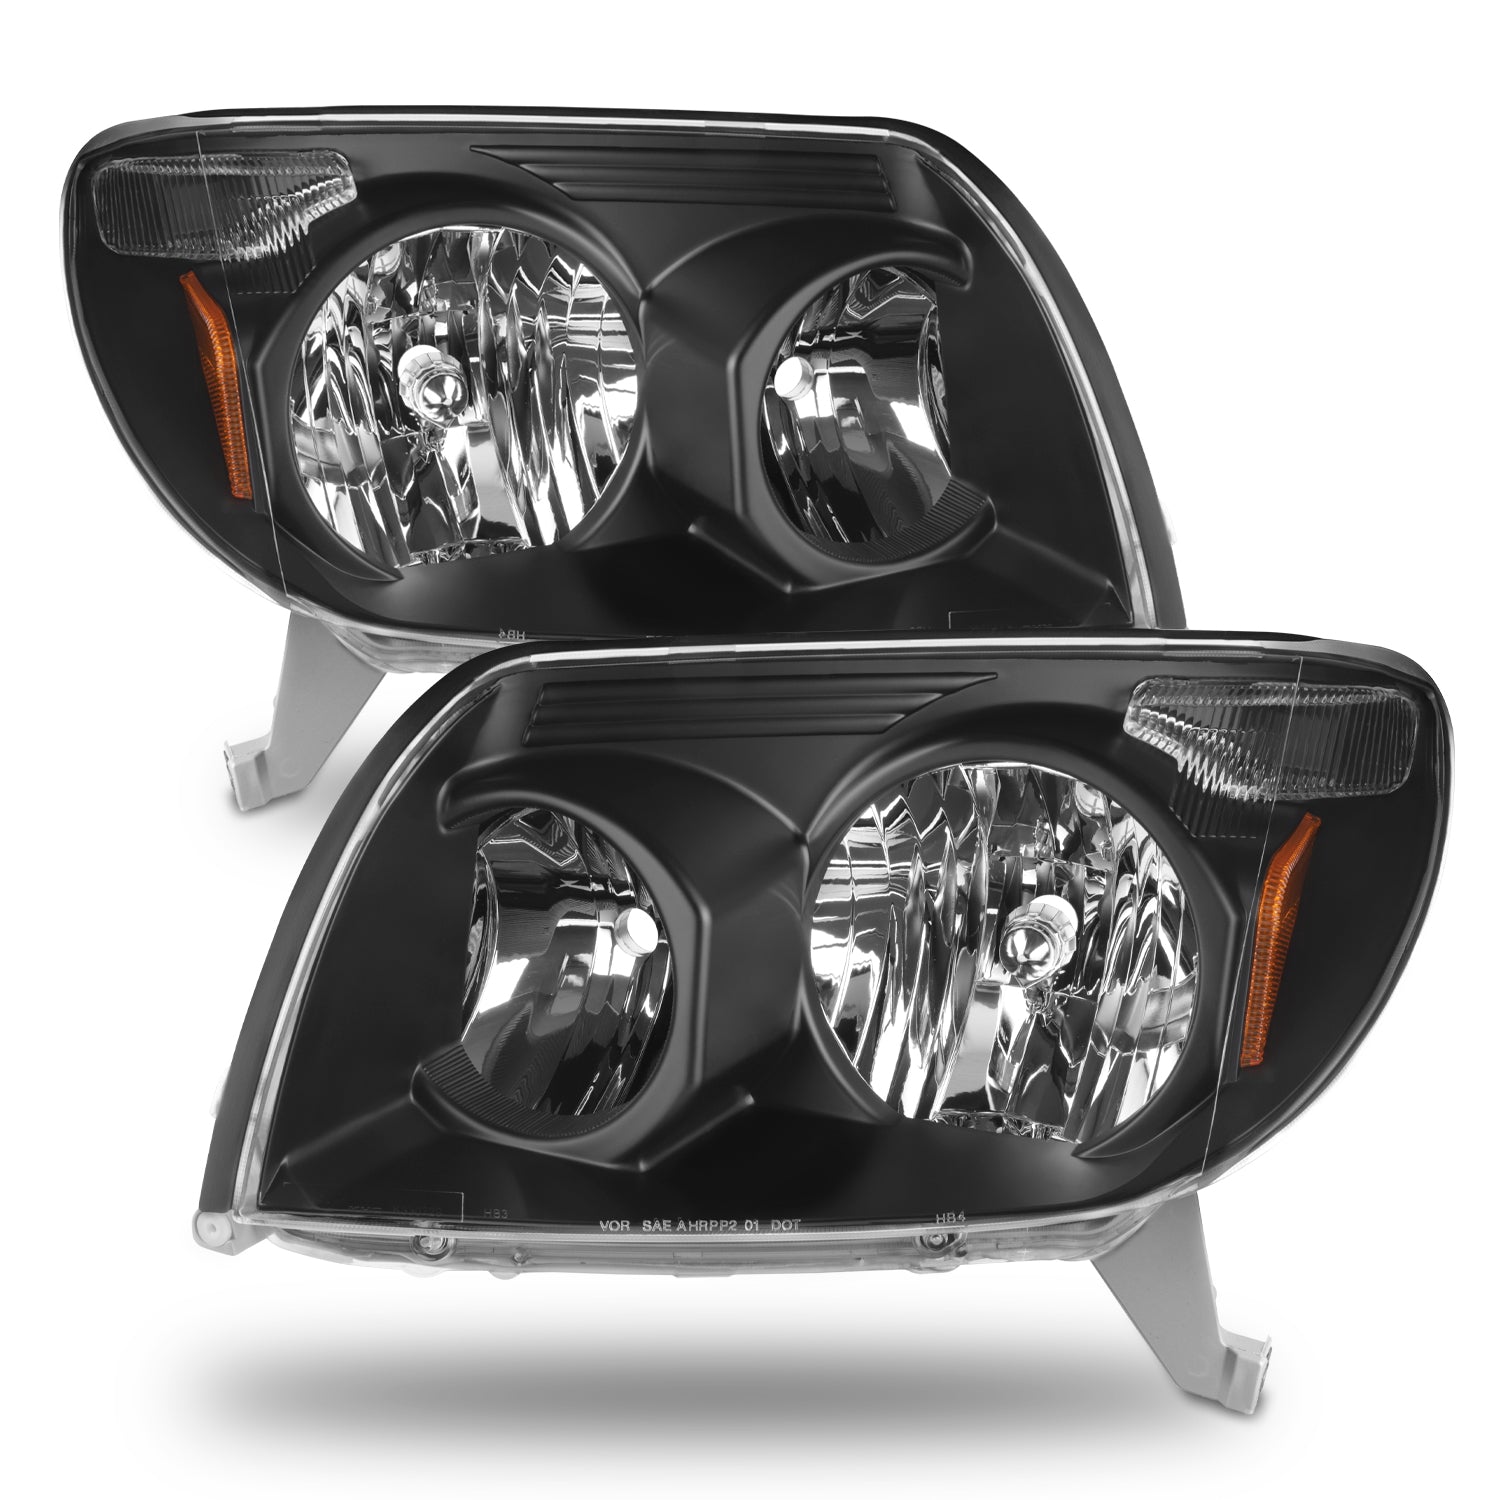 AKKON - For Ford F250/F350 Superduty Excursion Replacement Chrome LED